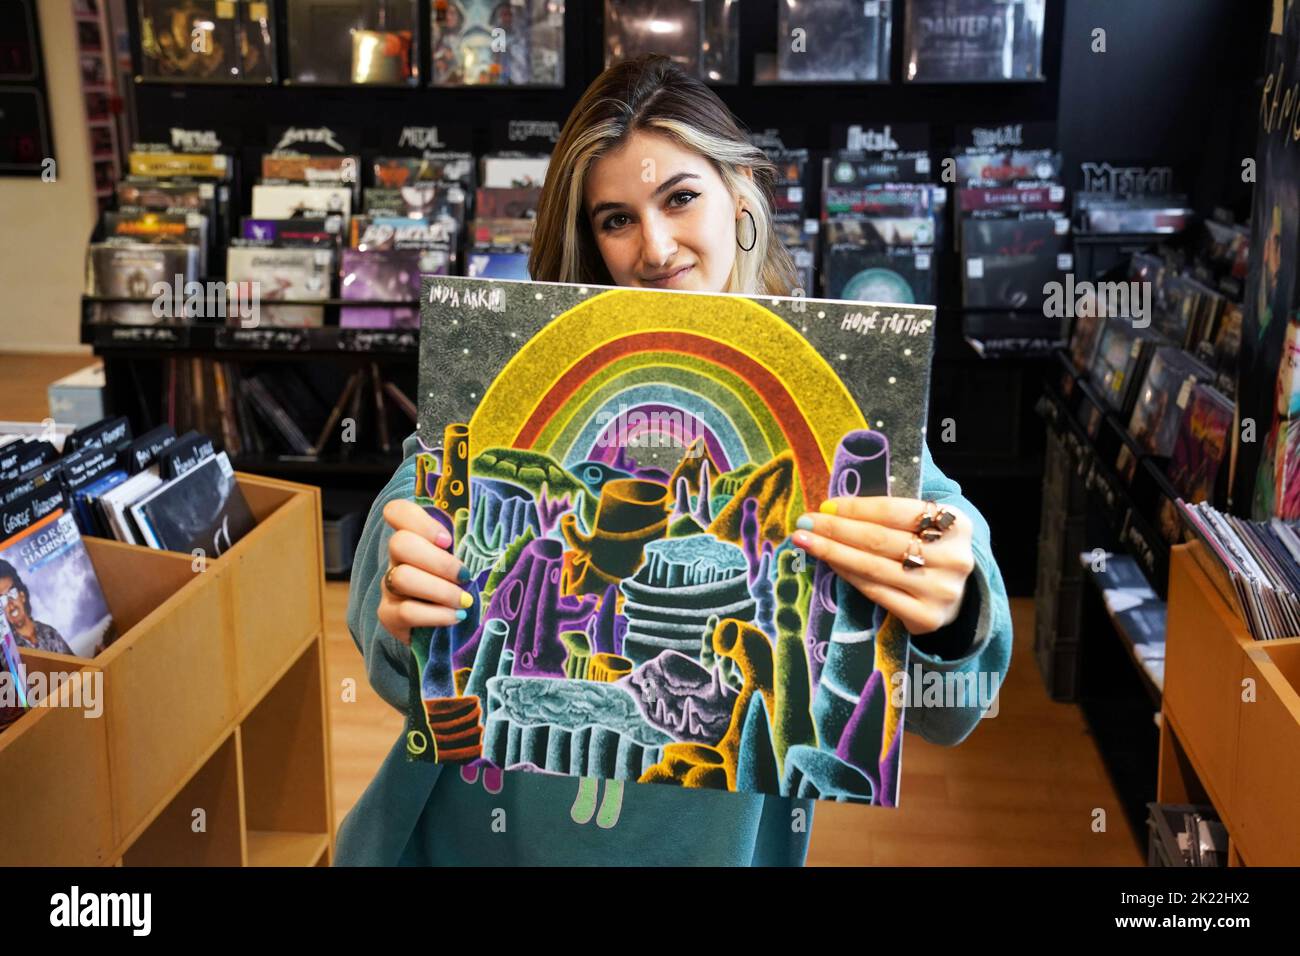 EDITORIAL USE ONLY India Arkin appears at an hmv store in Newcastle as part of the launch of its new record label, 1921 Records, ahead of National Album Day on Saturday October 15. Issue date: Thursday September 22, 2022. Stock Photo